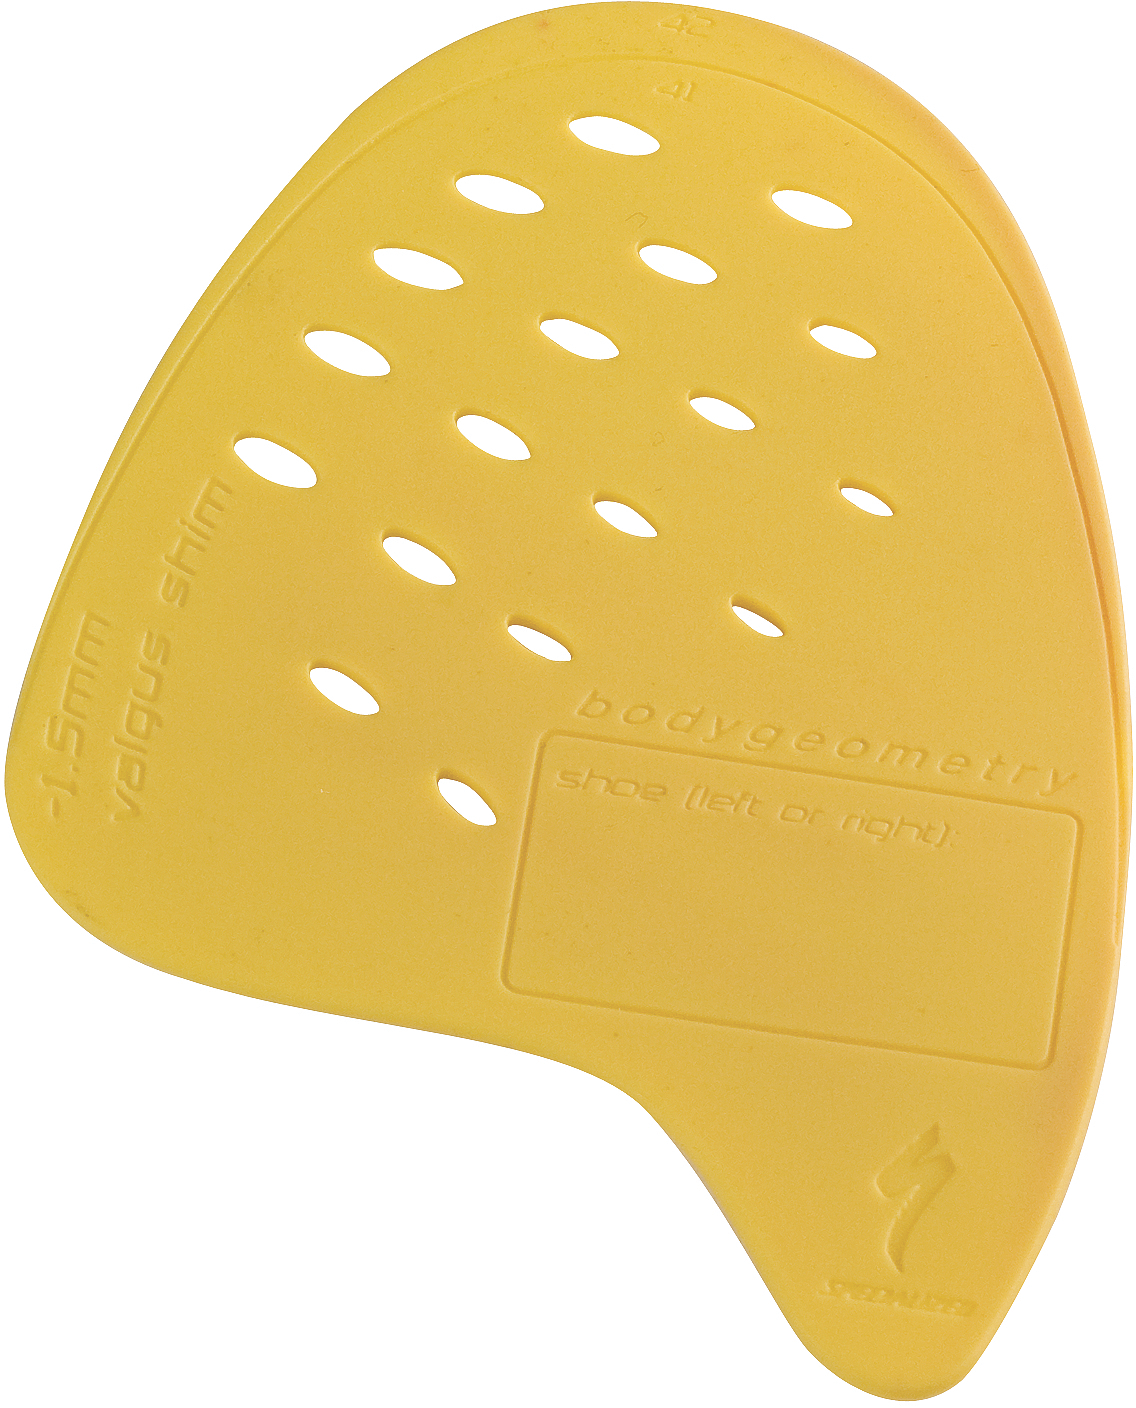 specialized shoe wedges